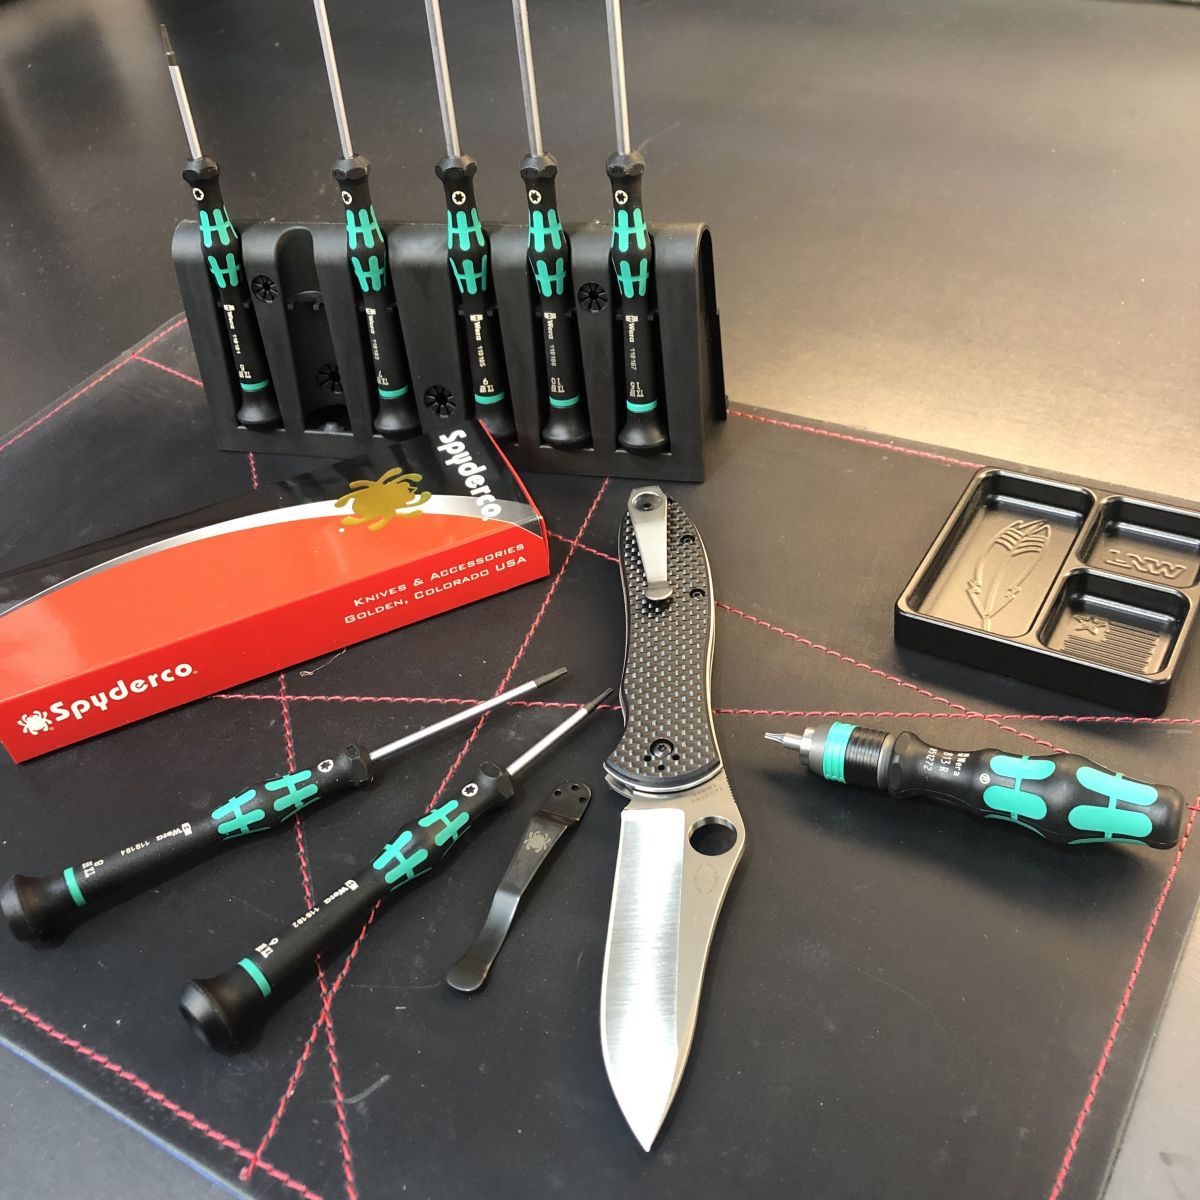 Build a Knife From The Latest Knife Kits